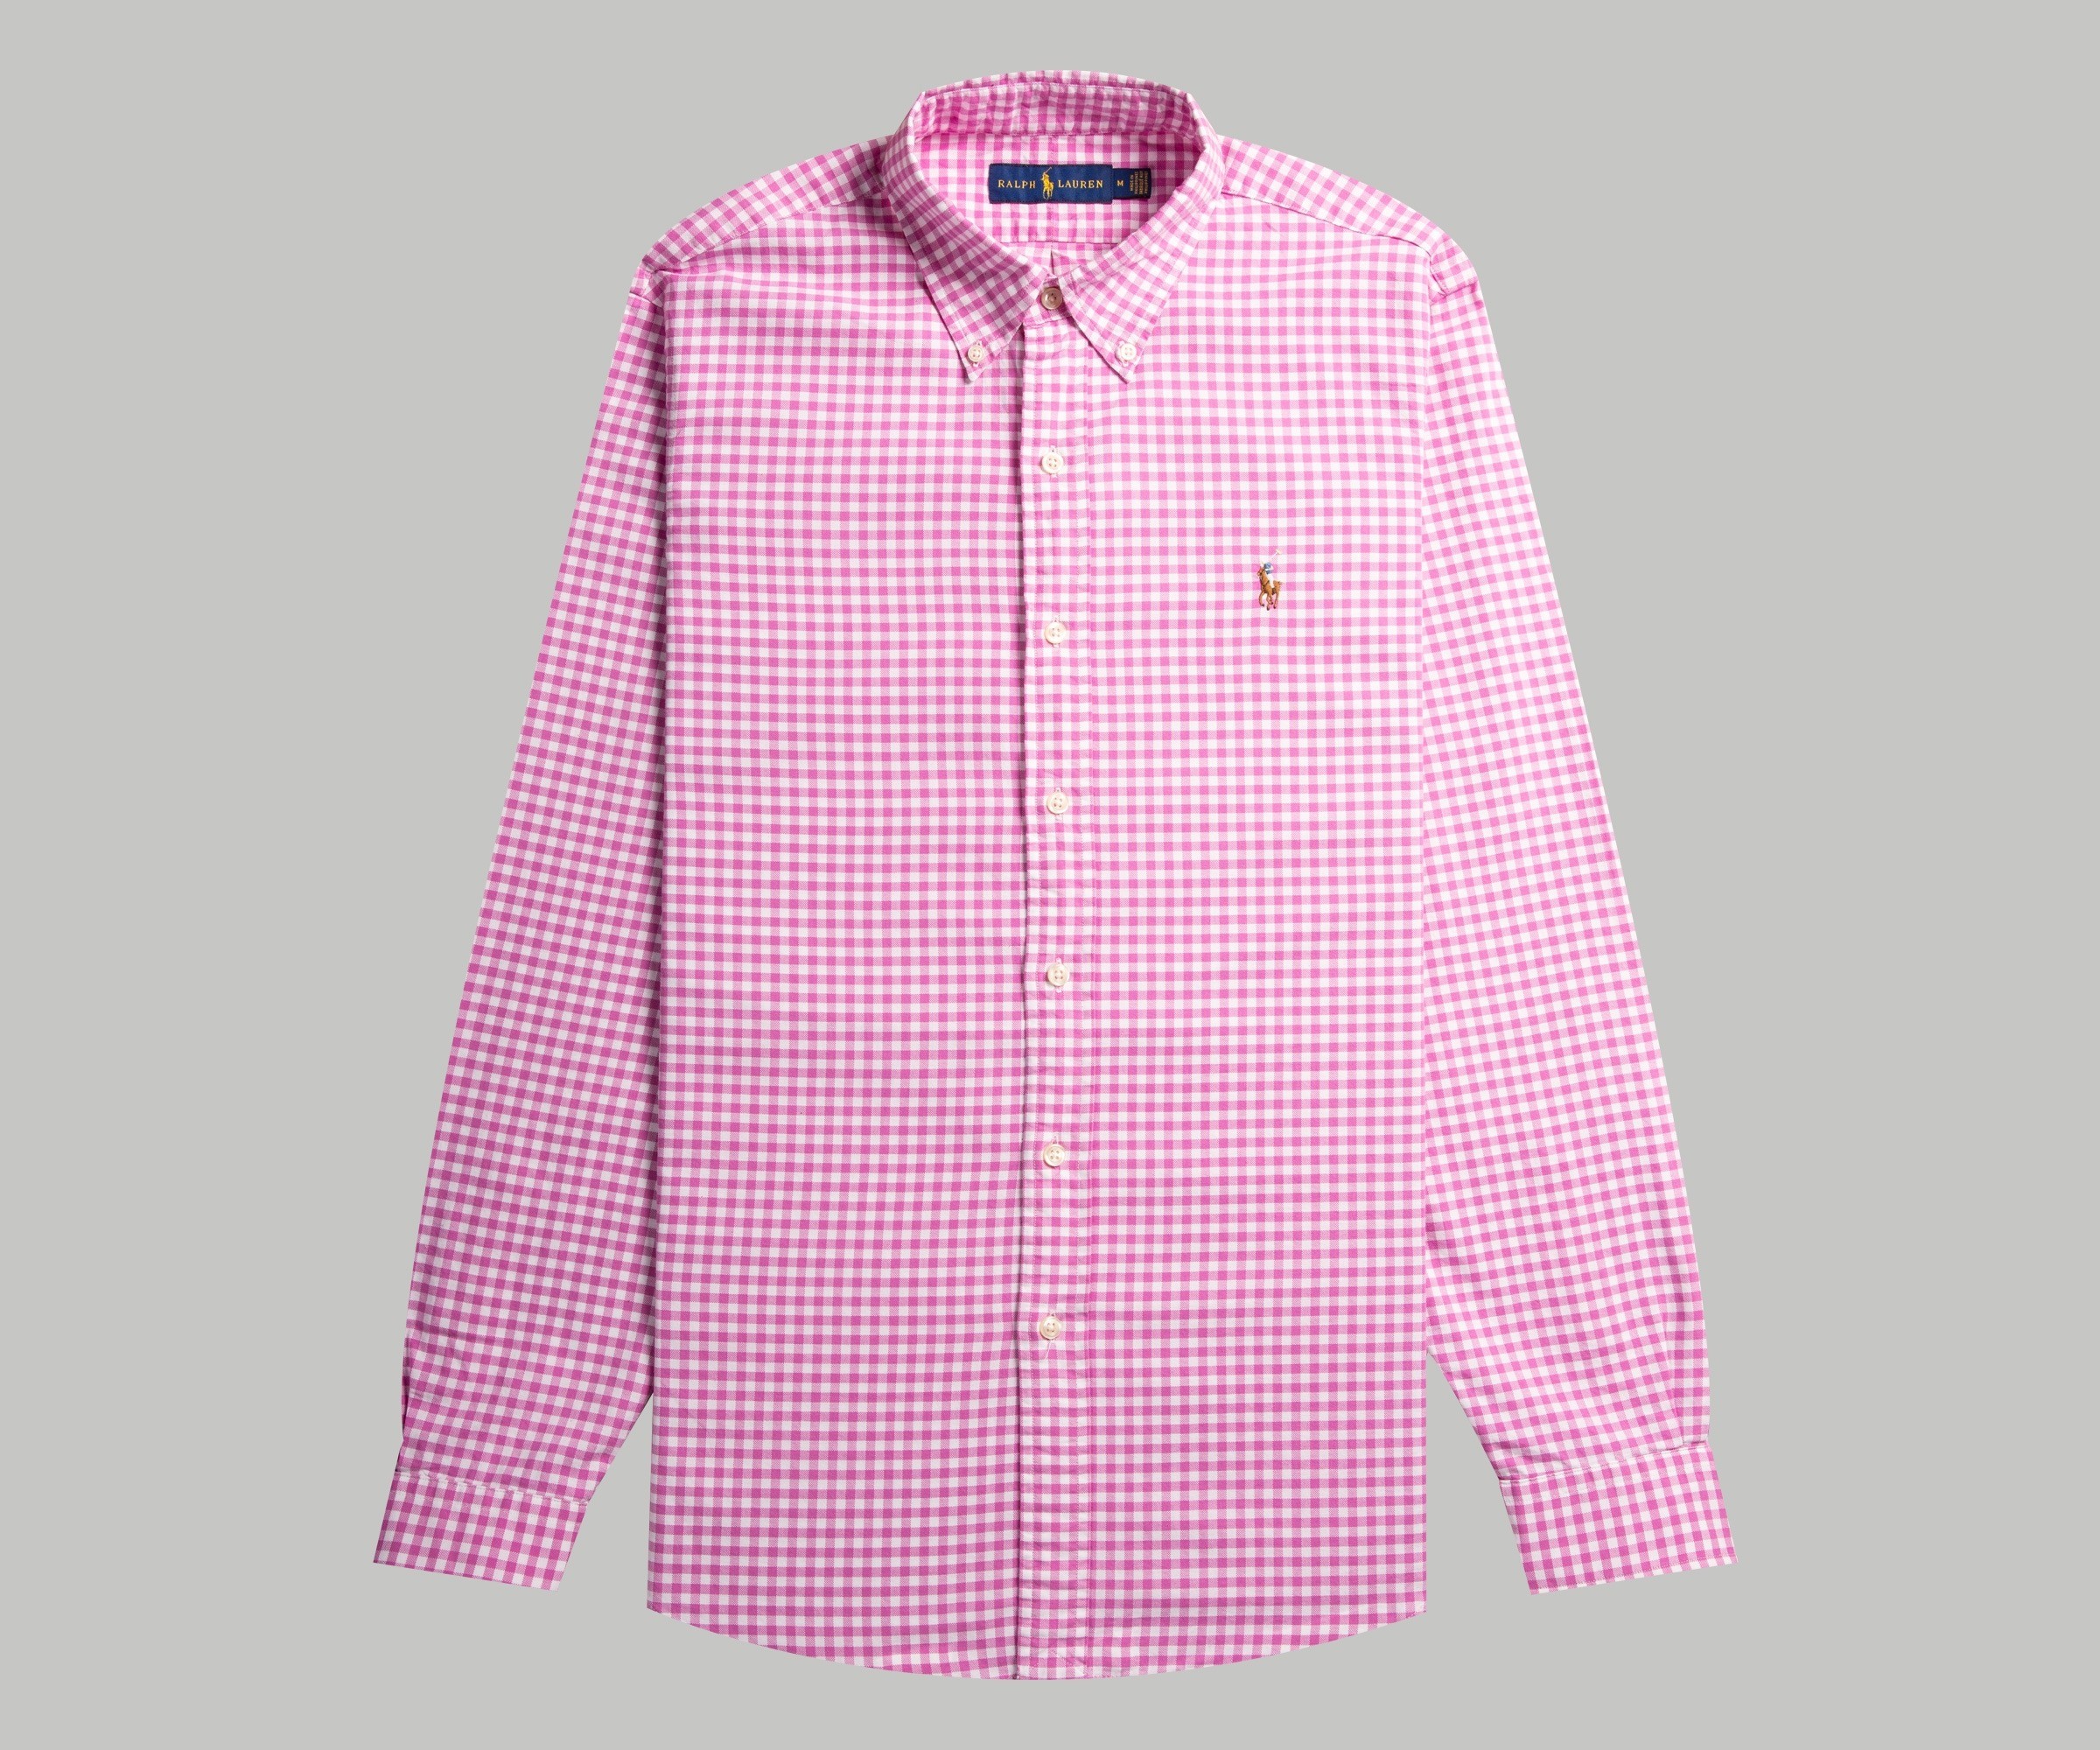 Polo Ralph Lauren Classic Fit Gingham Shirt Pink & White